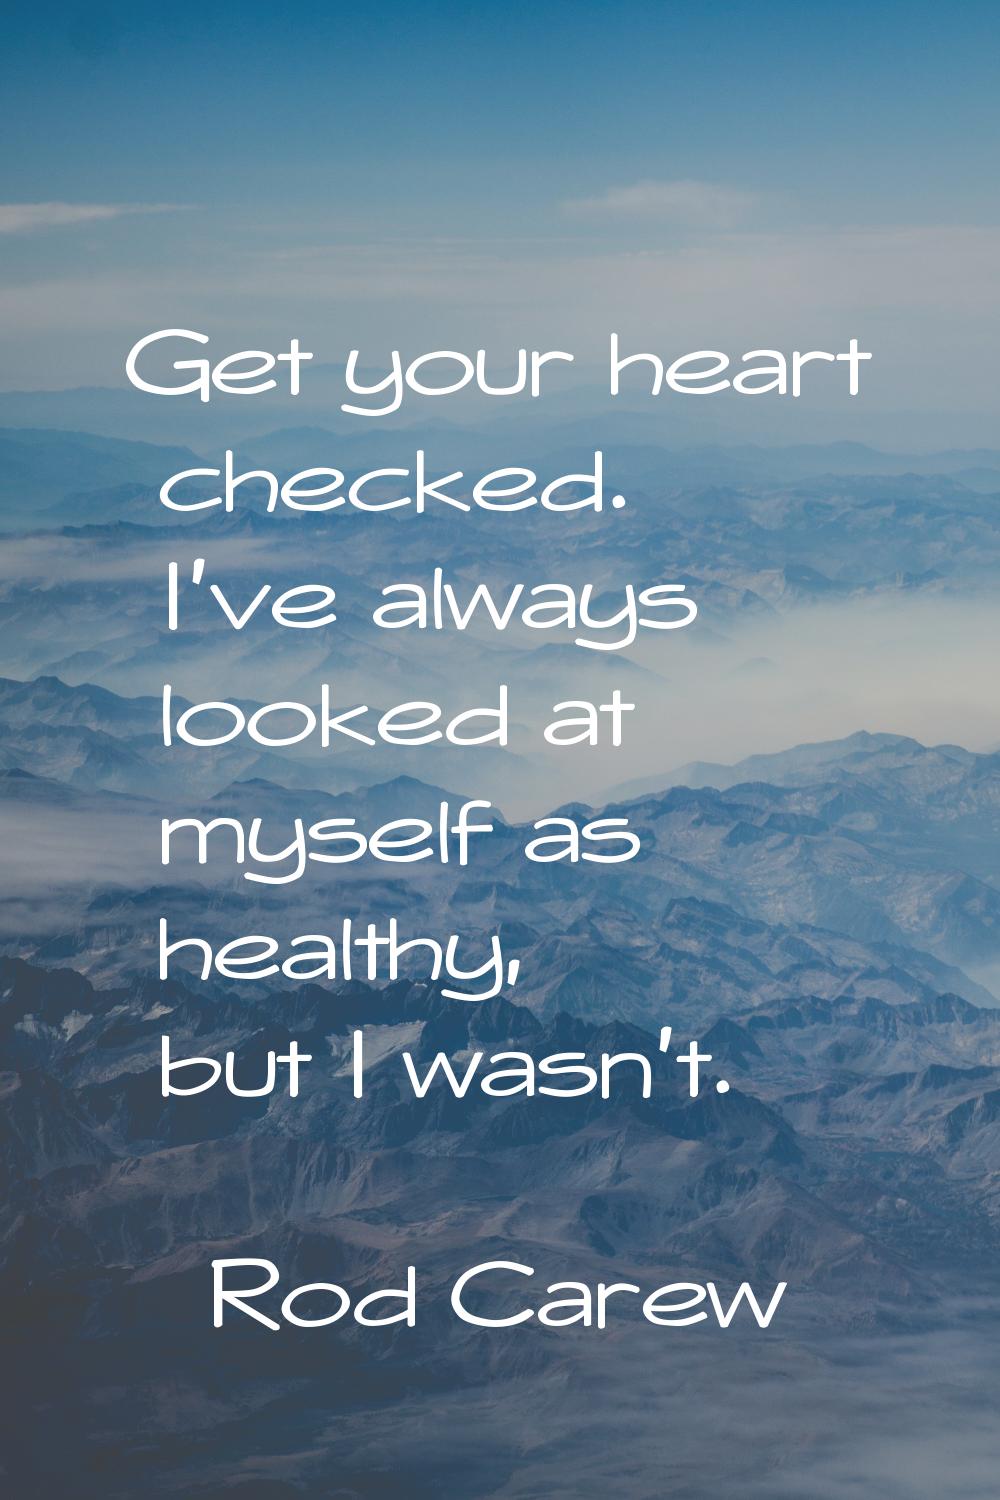 Get your heart checked. I've always looked at myself as healthy, but I wasn't.